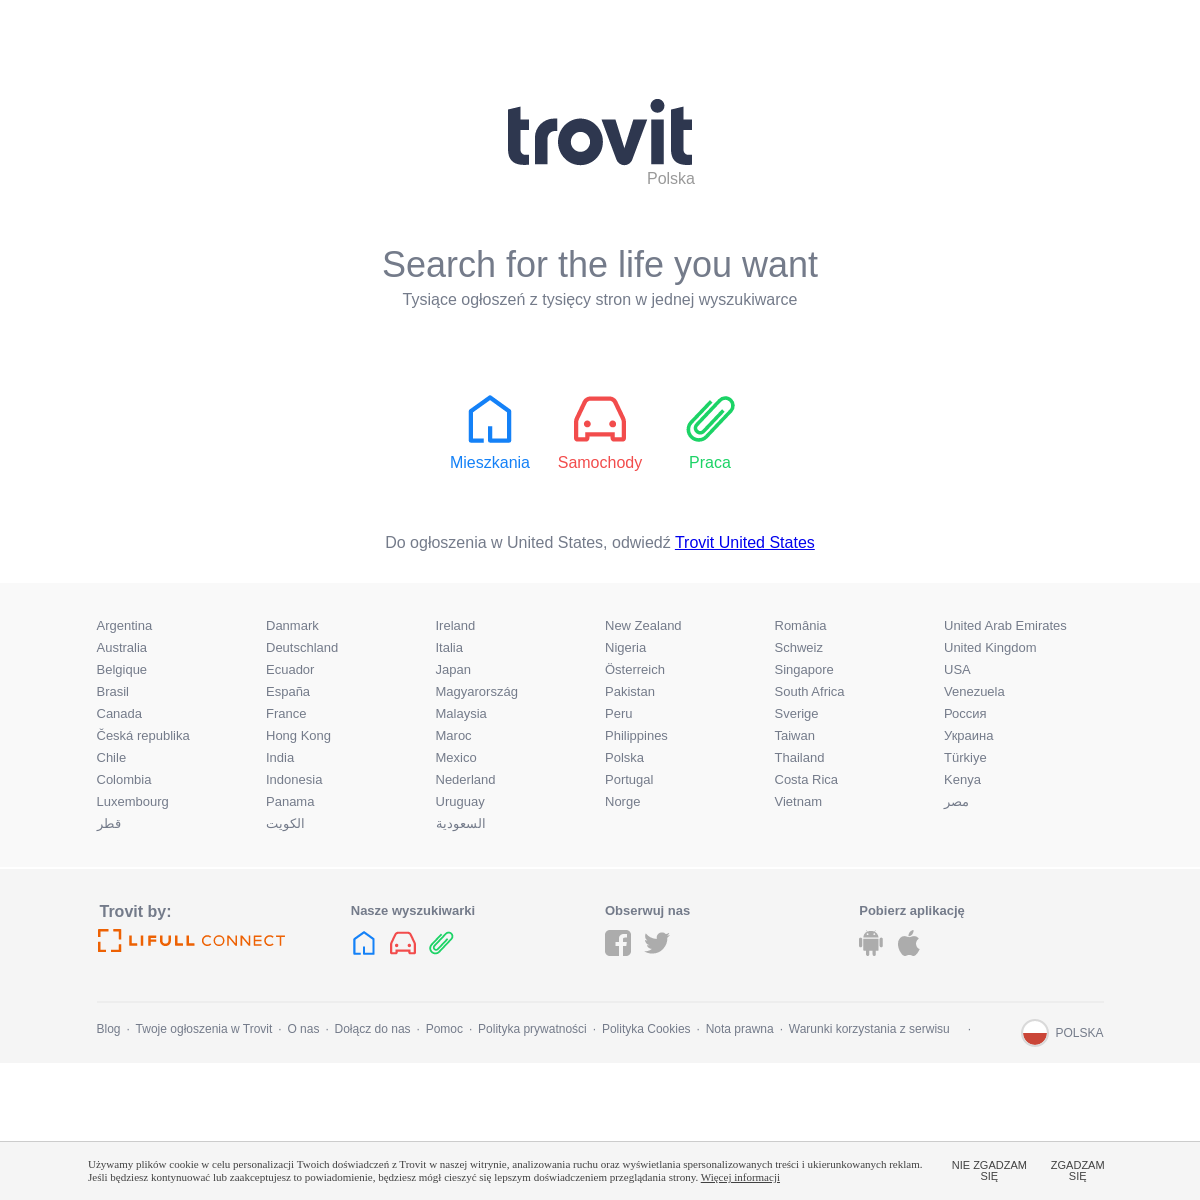 A complete backup of trovit.pl